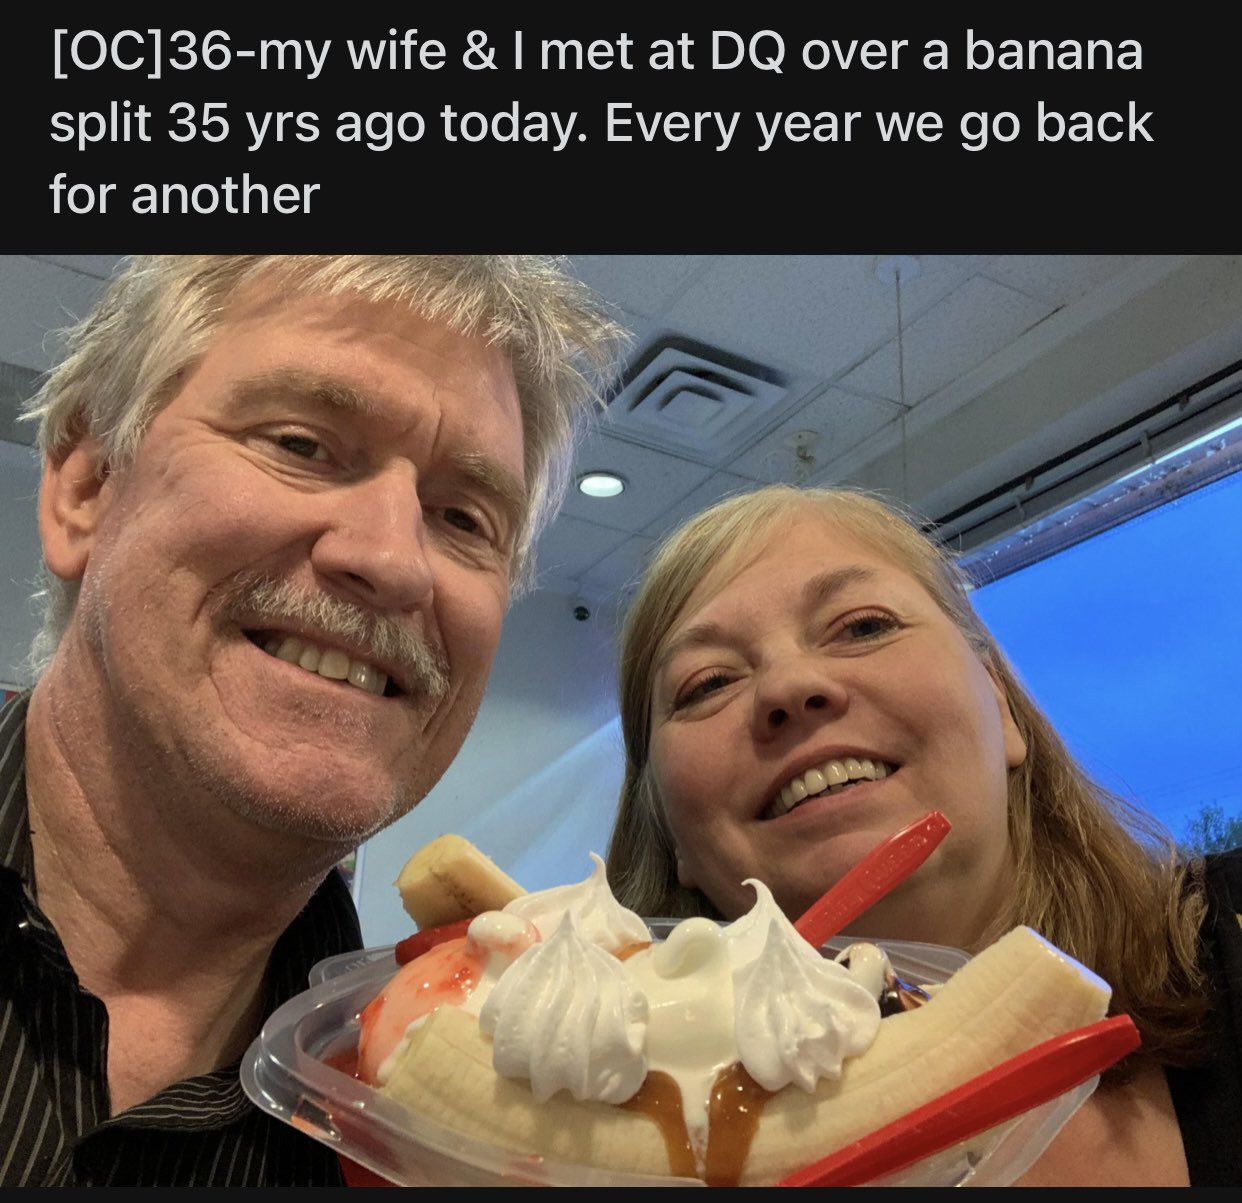 Dudes posting their wins - dairy qeen banana split - Oc36my wife & I met at Dq over a banana split 35 yrs ago today. Every year we go back for another